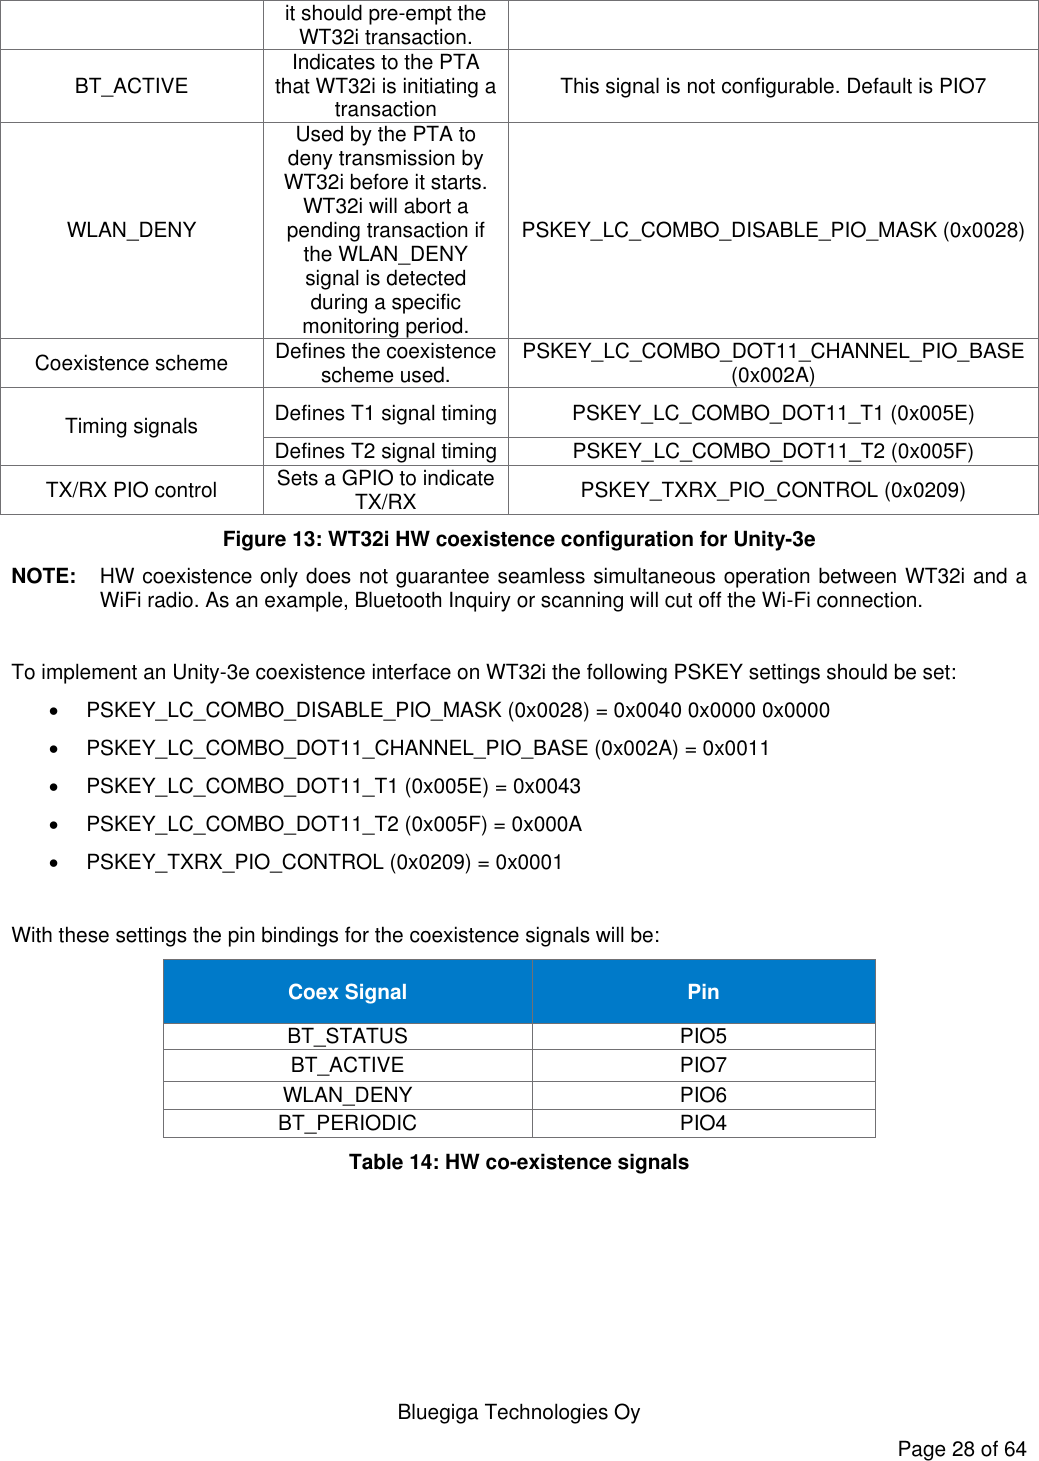   Bluegiga Technologies Oy Page 28 of 64 it should pre-empt the WT32i transaction. BT_ACTIVE Indicates to the PTA that WT32i is initiating a transaction This signal is not configurable. Default is PIO7 WLAN_DENY Used by the PTA to deny transmission by WT32i before it starts. WT32i will abort a pending transaction if the WLAN_DENY signal is detected during a specific monitoring period. PSKEY_LC_COMBO_DISABLE_PIO_MASK (0x0028) Coexistence scheme Defines the coexistence scheme used. PSKEY_LC_COMBO_DOT11_CHANNEL_PIO_BASE (0x002A) Timing signals Defines T1 signal timing PSKEY_LC_COMBO_DOT11_T1 (0x005E) Defines T2 signal timing PSKEY_LC_COMBO_DOT11_T2 (0x005F) TX/RX PIO control Sets a GPIO to indicate TX/RX PSKEY_TXRX_PIO_CONTROL (0x0209) Figure 13: WT32i HW coexistence configuration for Unity-3e NOTE:   HW coexistence only does not guarantee seamless simultaneous operation between WT32i and a WiFi radio. As an example, Bluetooth Inquiry or scanning will cut off the Wi-Fi connection.  To implement an Unity-3e coexistence interface on WT32i the following PSKEY settings should be set:   PSKEY_LC_COMBO_DISABLE_PIO_MASK (0x0028) = 0x0040 0x0000 0x0000   PSKEY_LC_COMBO_DOT11_CHANNEL_PIO_BASE (0x002A) = 0x0011   PSKEY_LC_COMBO_DOT11_T1 (0x005E) = 0x0043   PSKEY_LC_COMBO_DOT11_T2 (0x005F) = 0x000A   PSKEY_TXRX_PIO_CONTROL (0x0209) = 0x0001  With these settings the pin bindings for the coexistence signals will be: Coex Signal Pin BT_STATUS PIO5 BT_ACTIVE PIO7 WLAN_DENY PIO6 BT_PERIODIC PIO4 Table 14: HW co-existence signals   